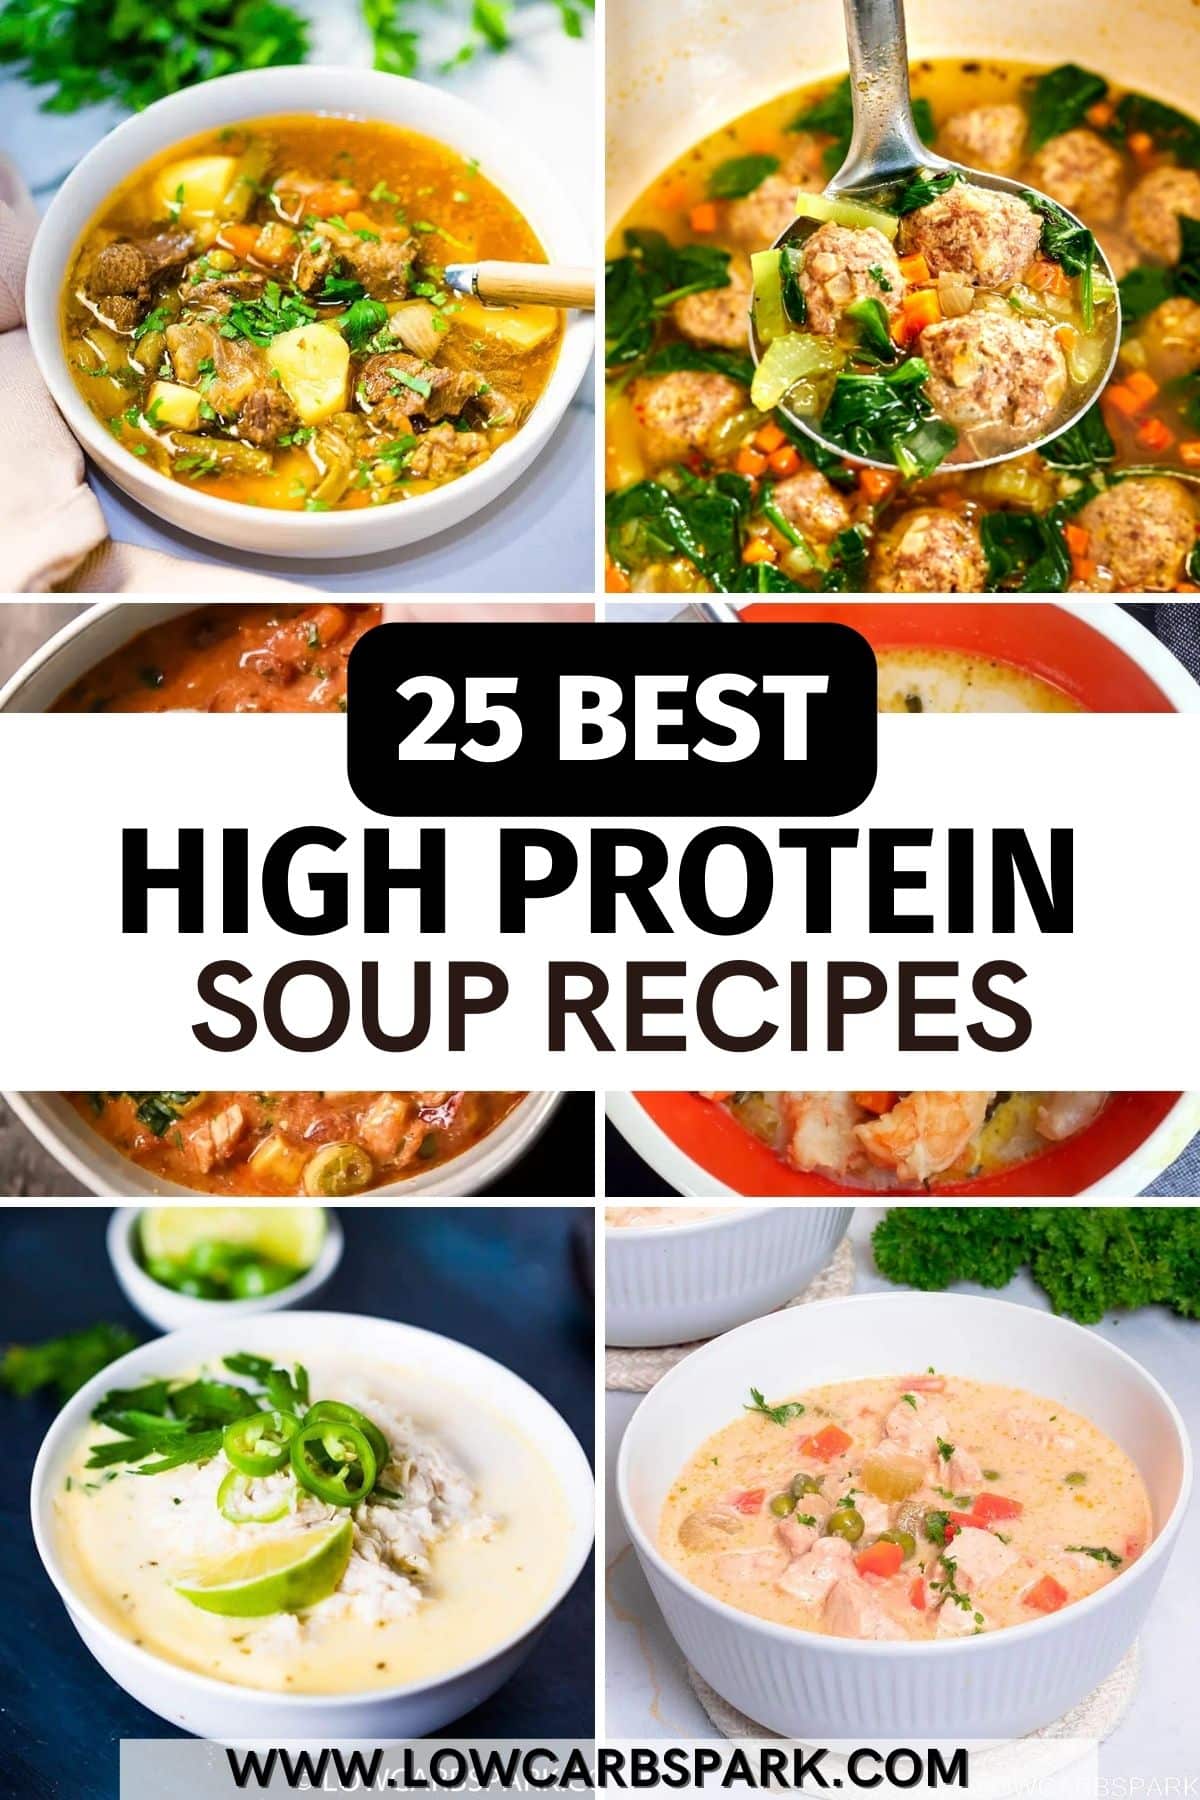 25 High Protein Soup Recipes